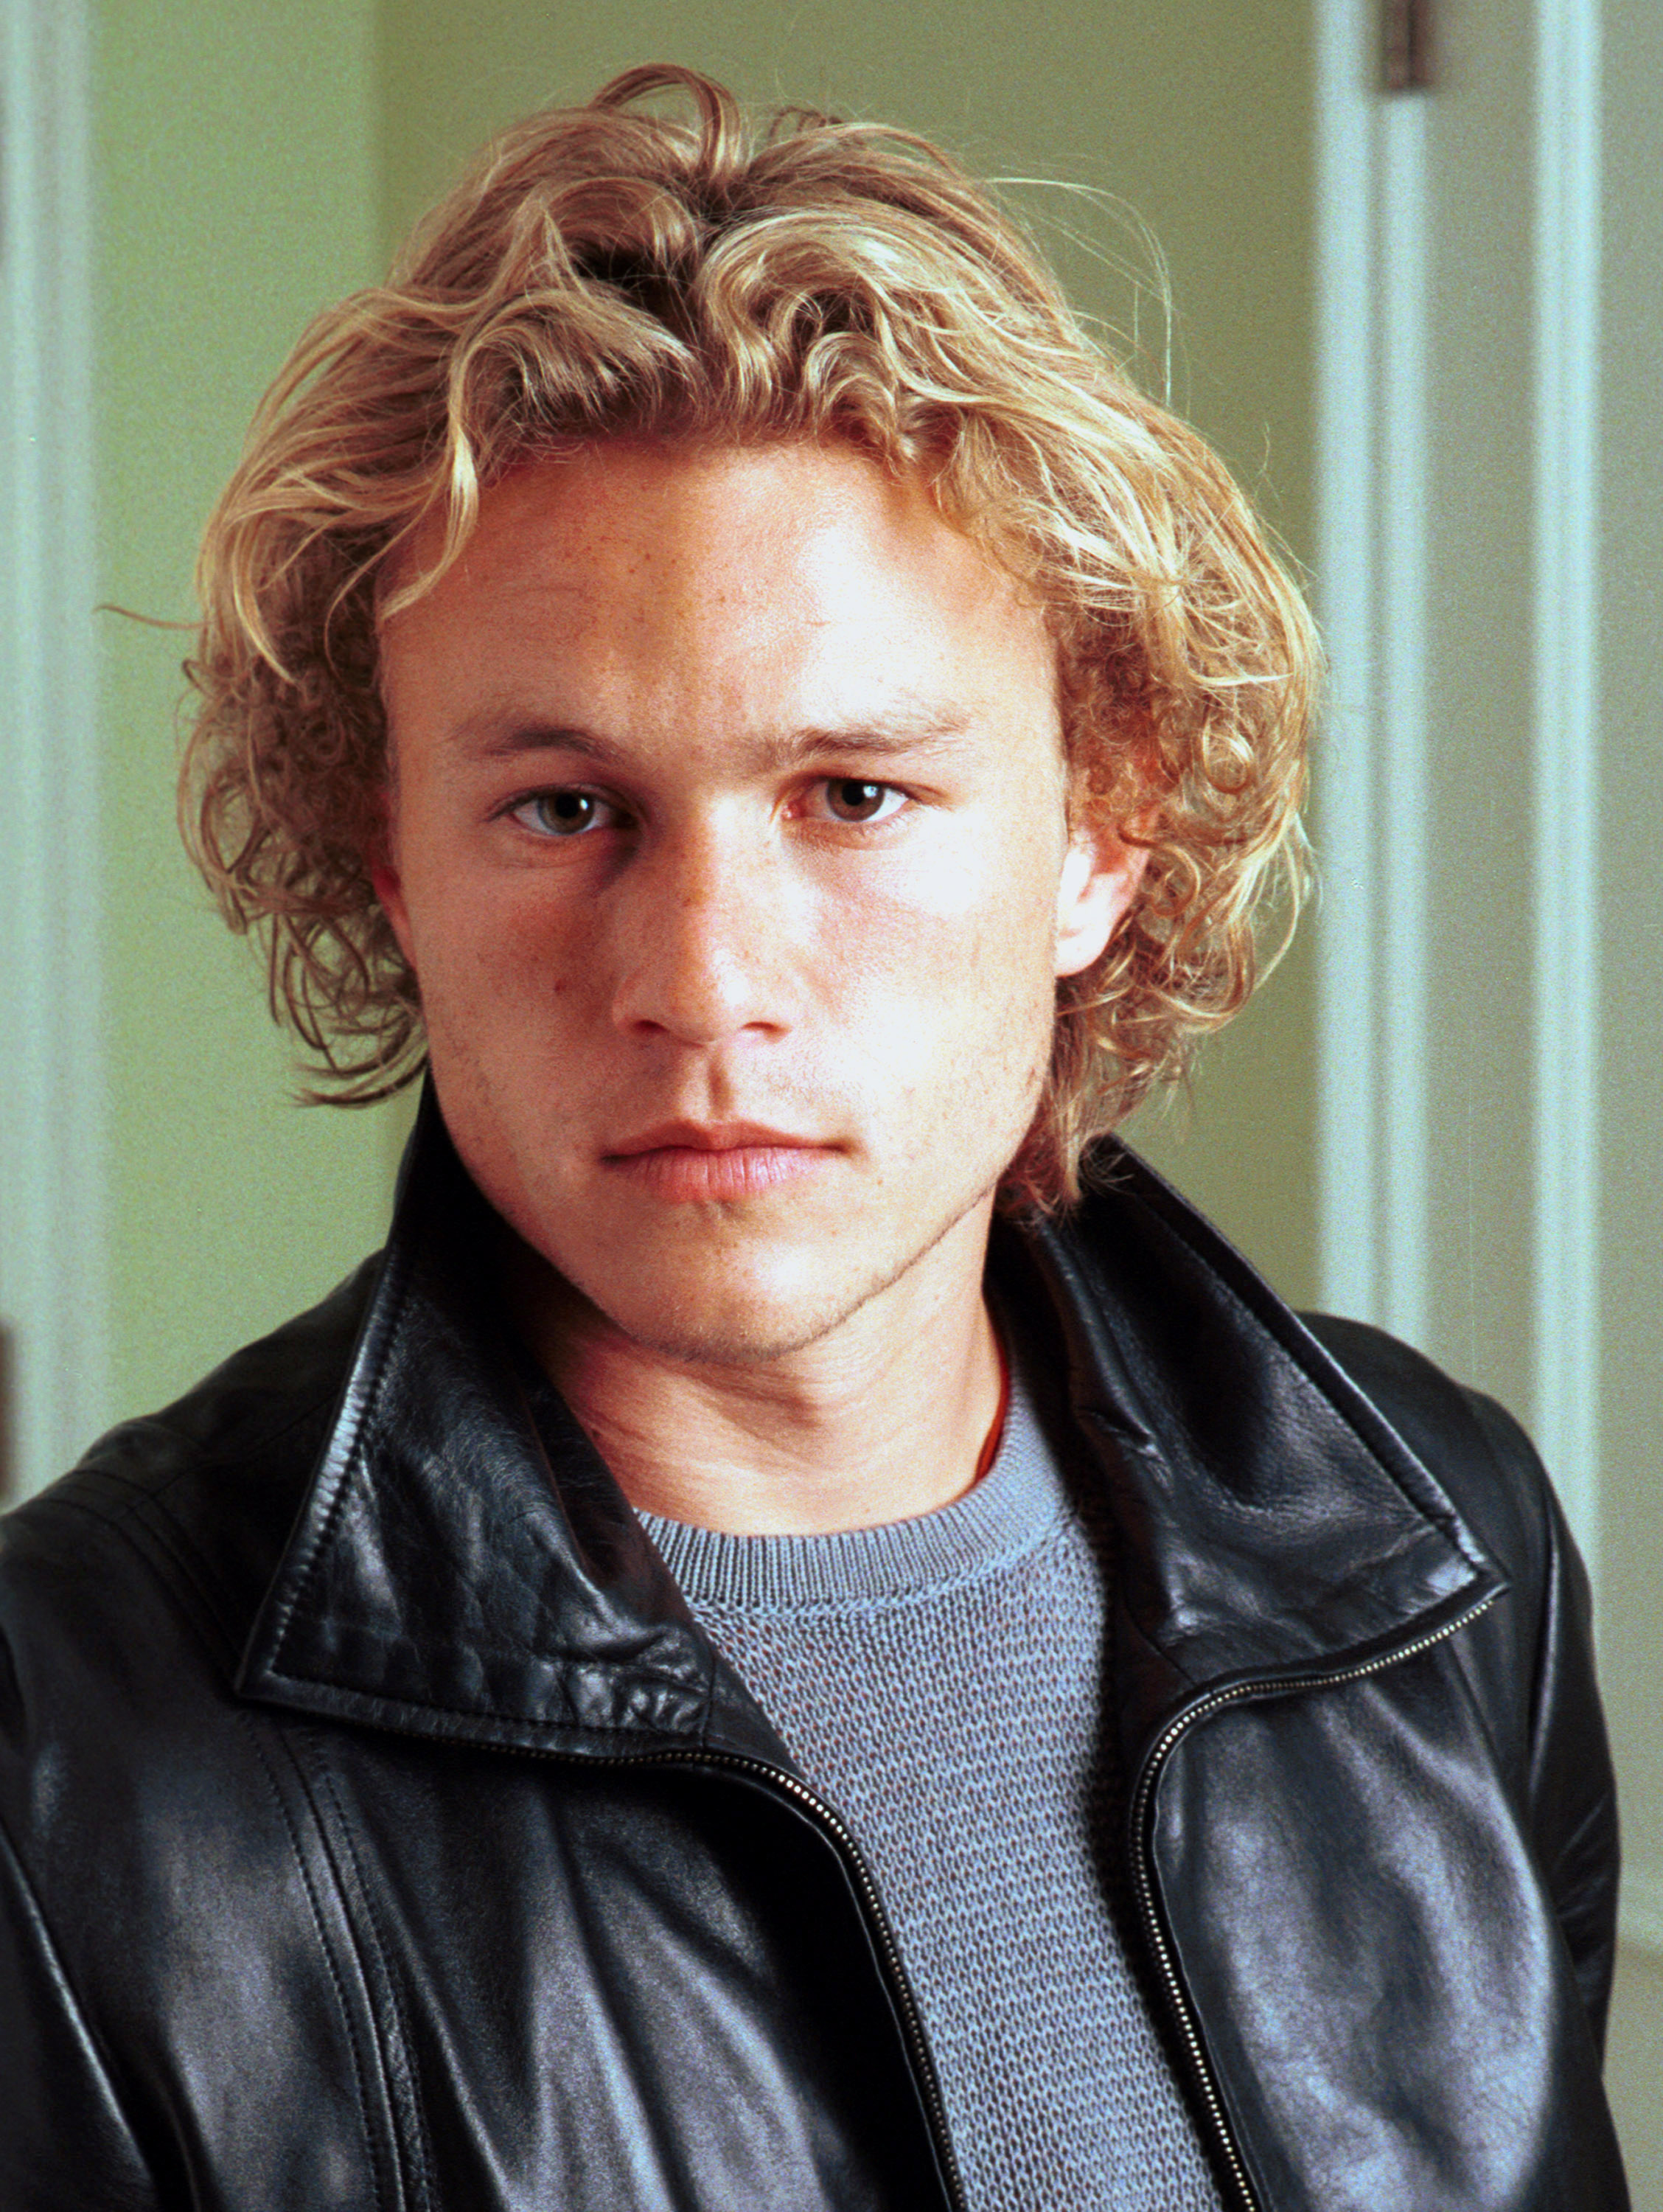 Heath Ledger posing for a photograph in Beverly Hills, California on June 9, 2000 | Source: Getty Images